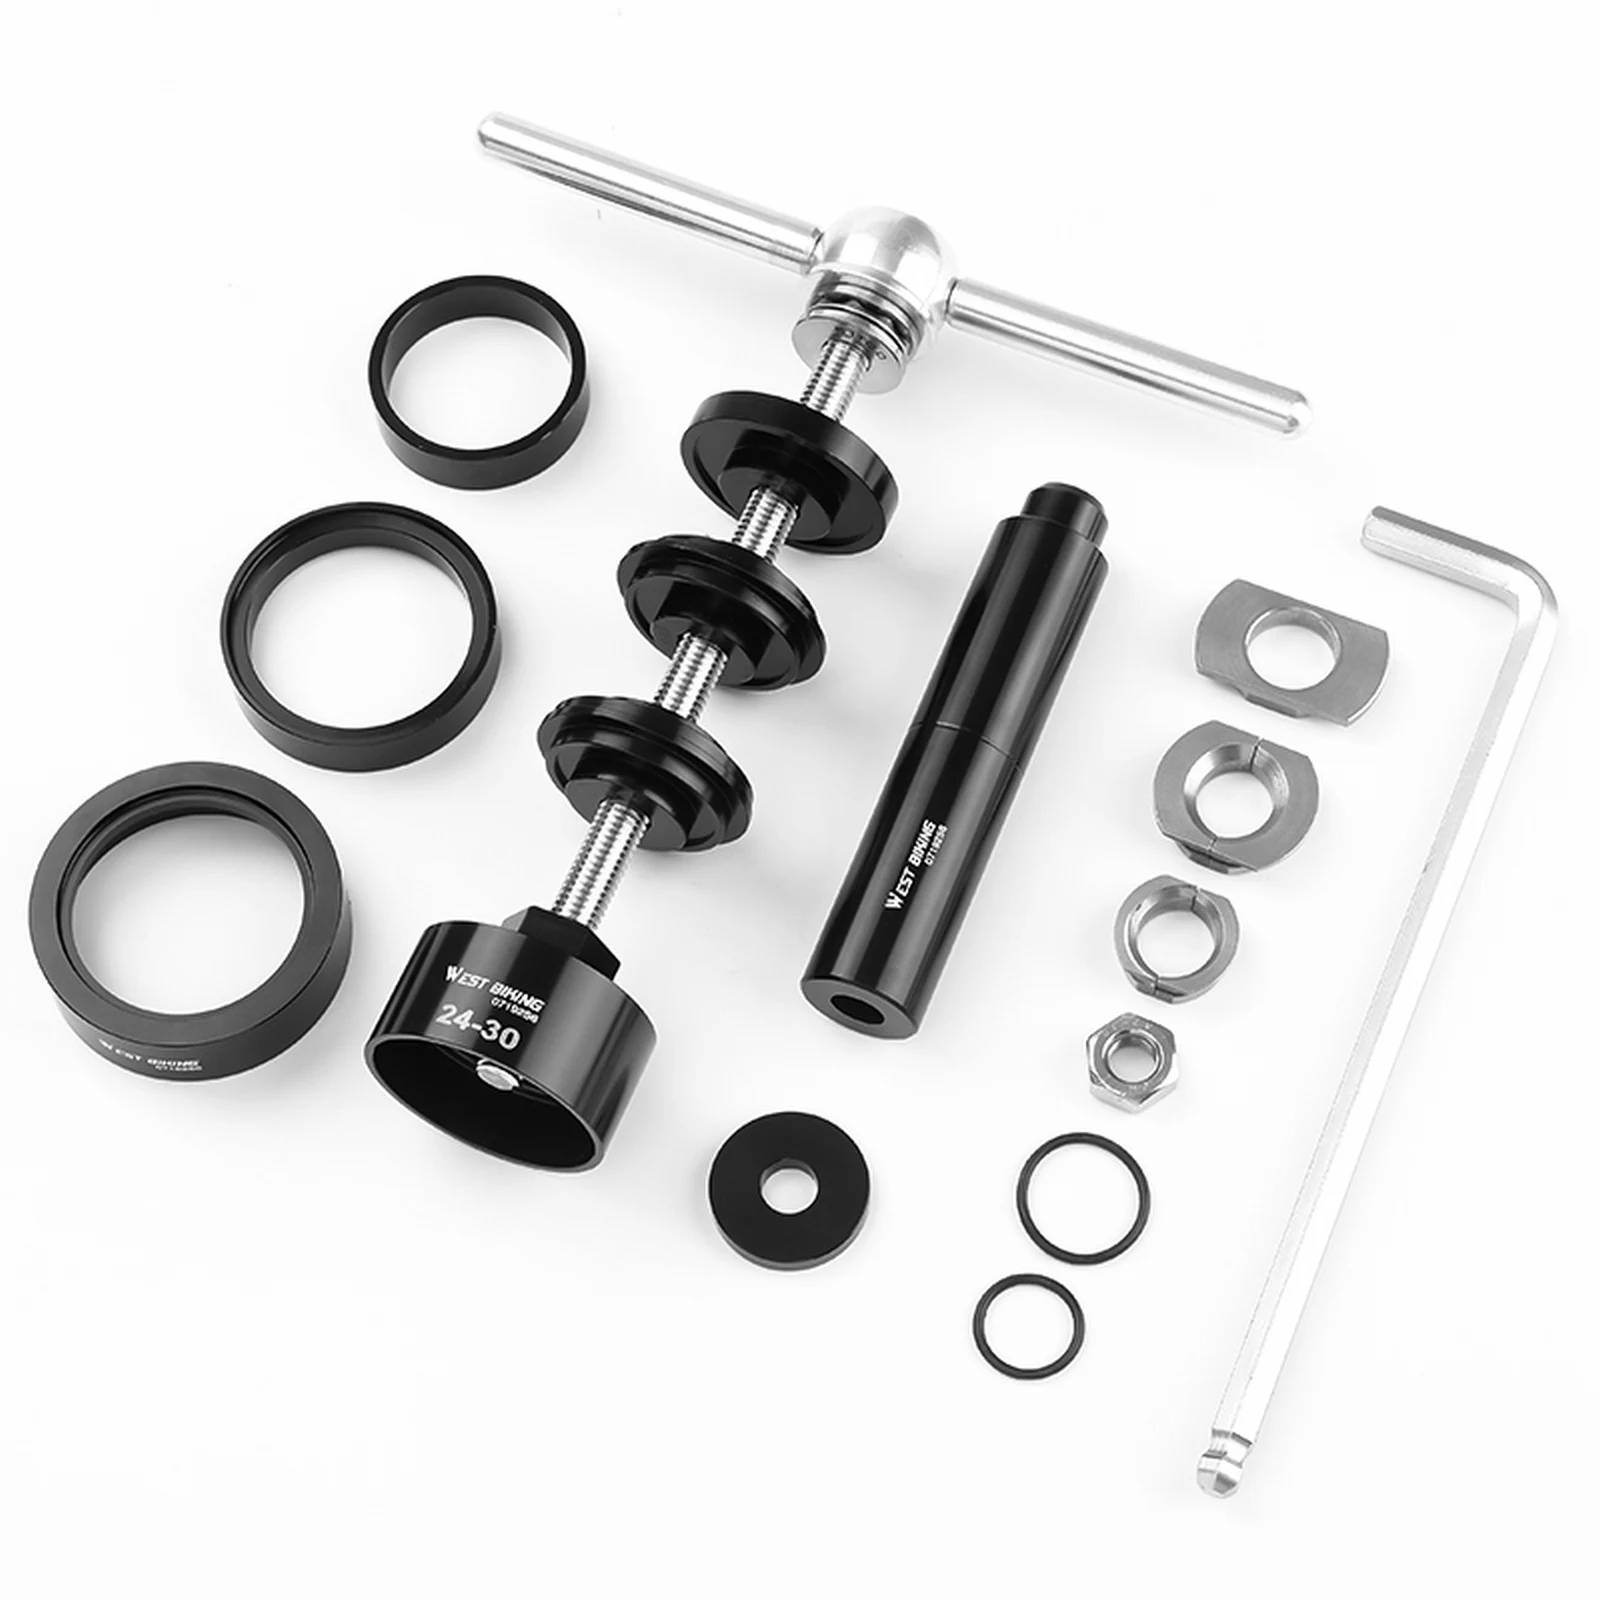 

Mountain Road Bike Bottom Bracket Press In Axle Static Installation Removal Tool Set MTB Bicycle Repair Kit For BB86/PF30/92/386